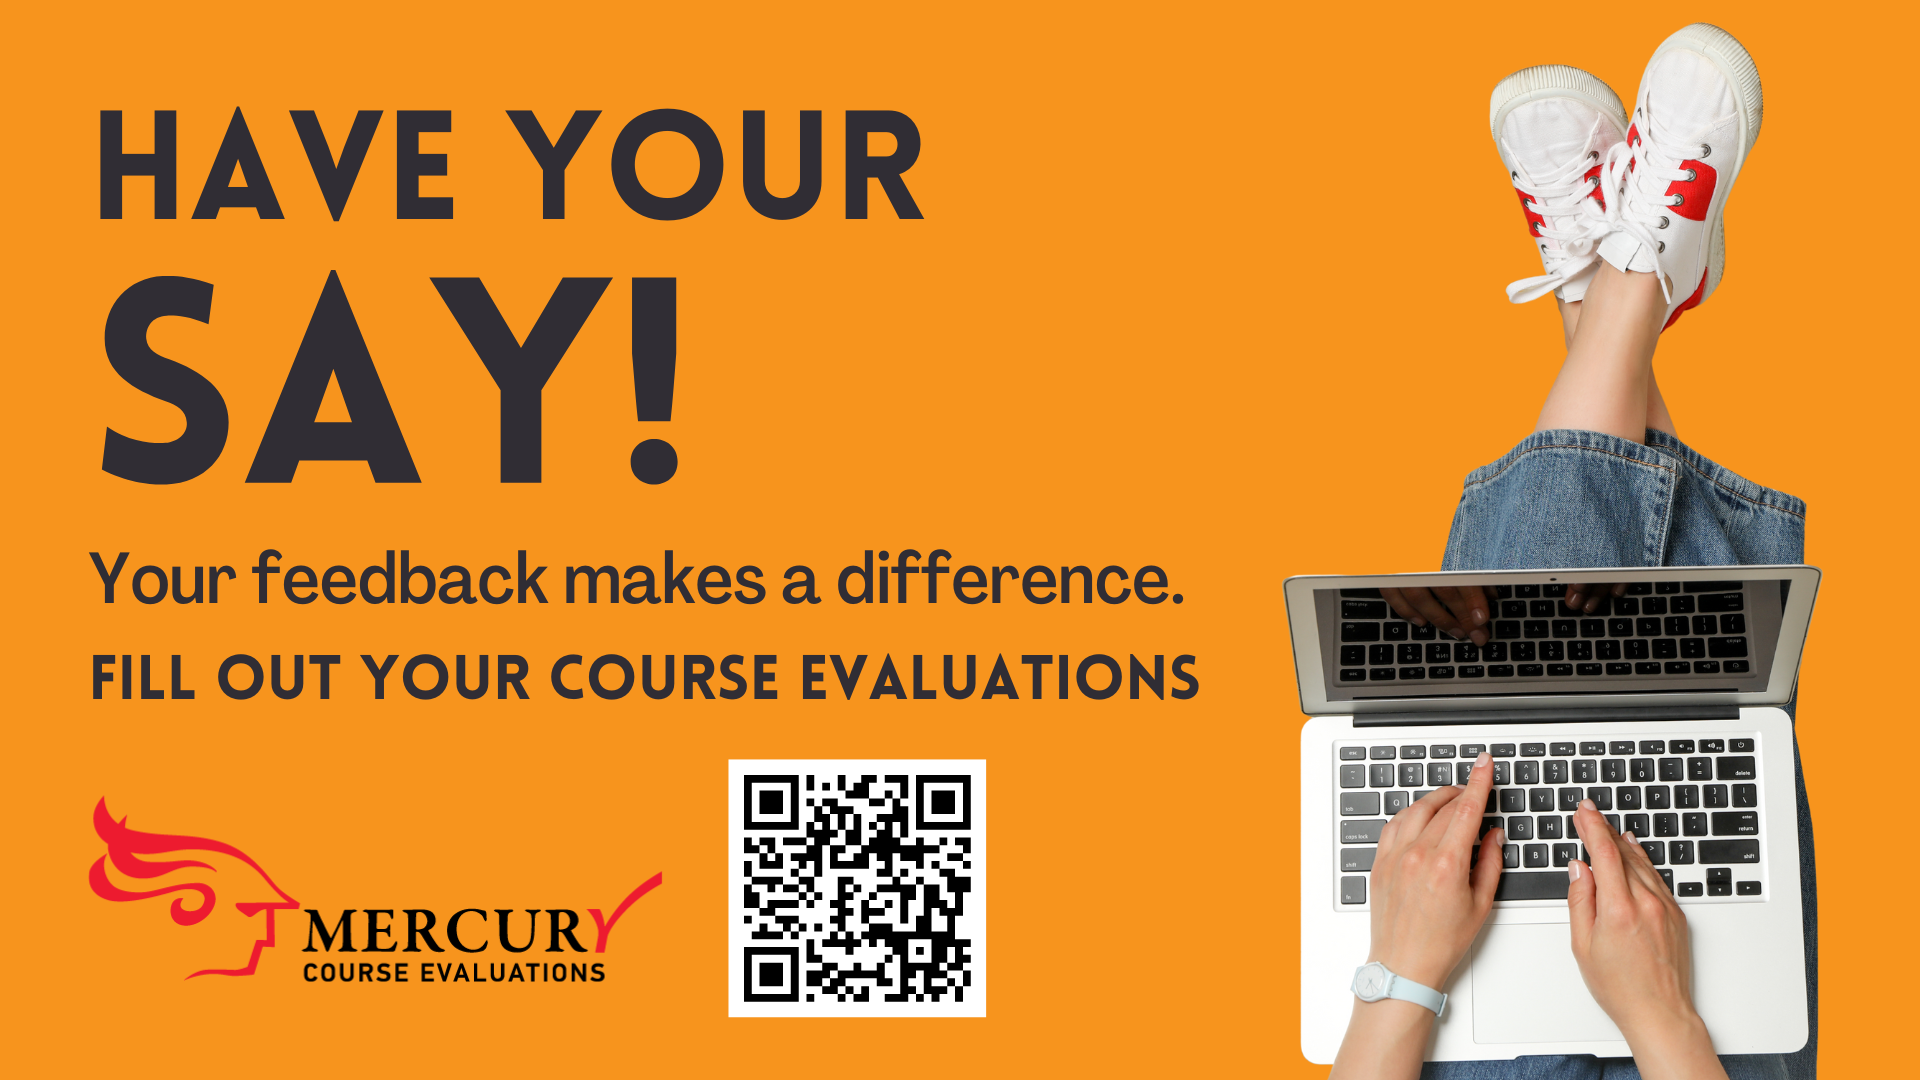 Complete your course evaluations - by December 21